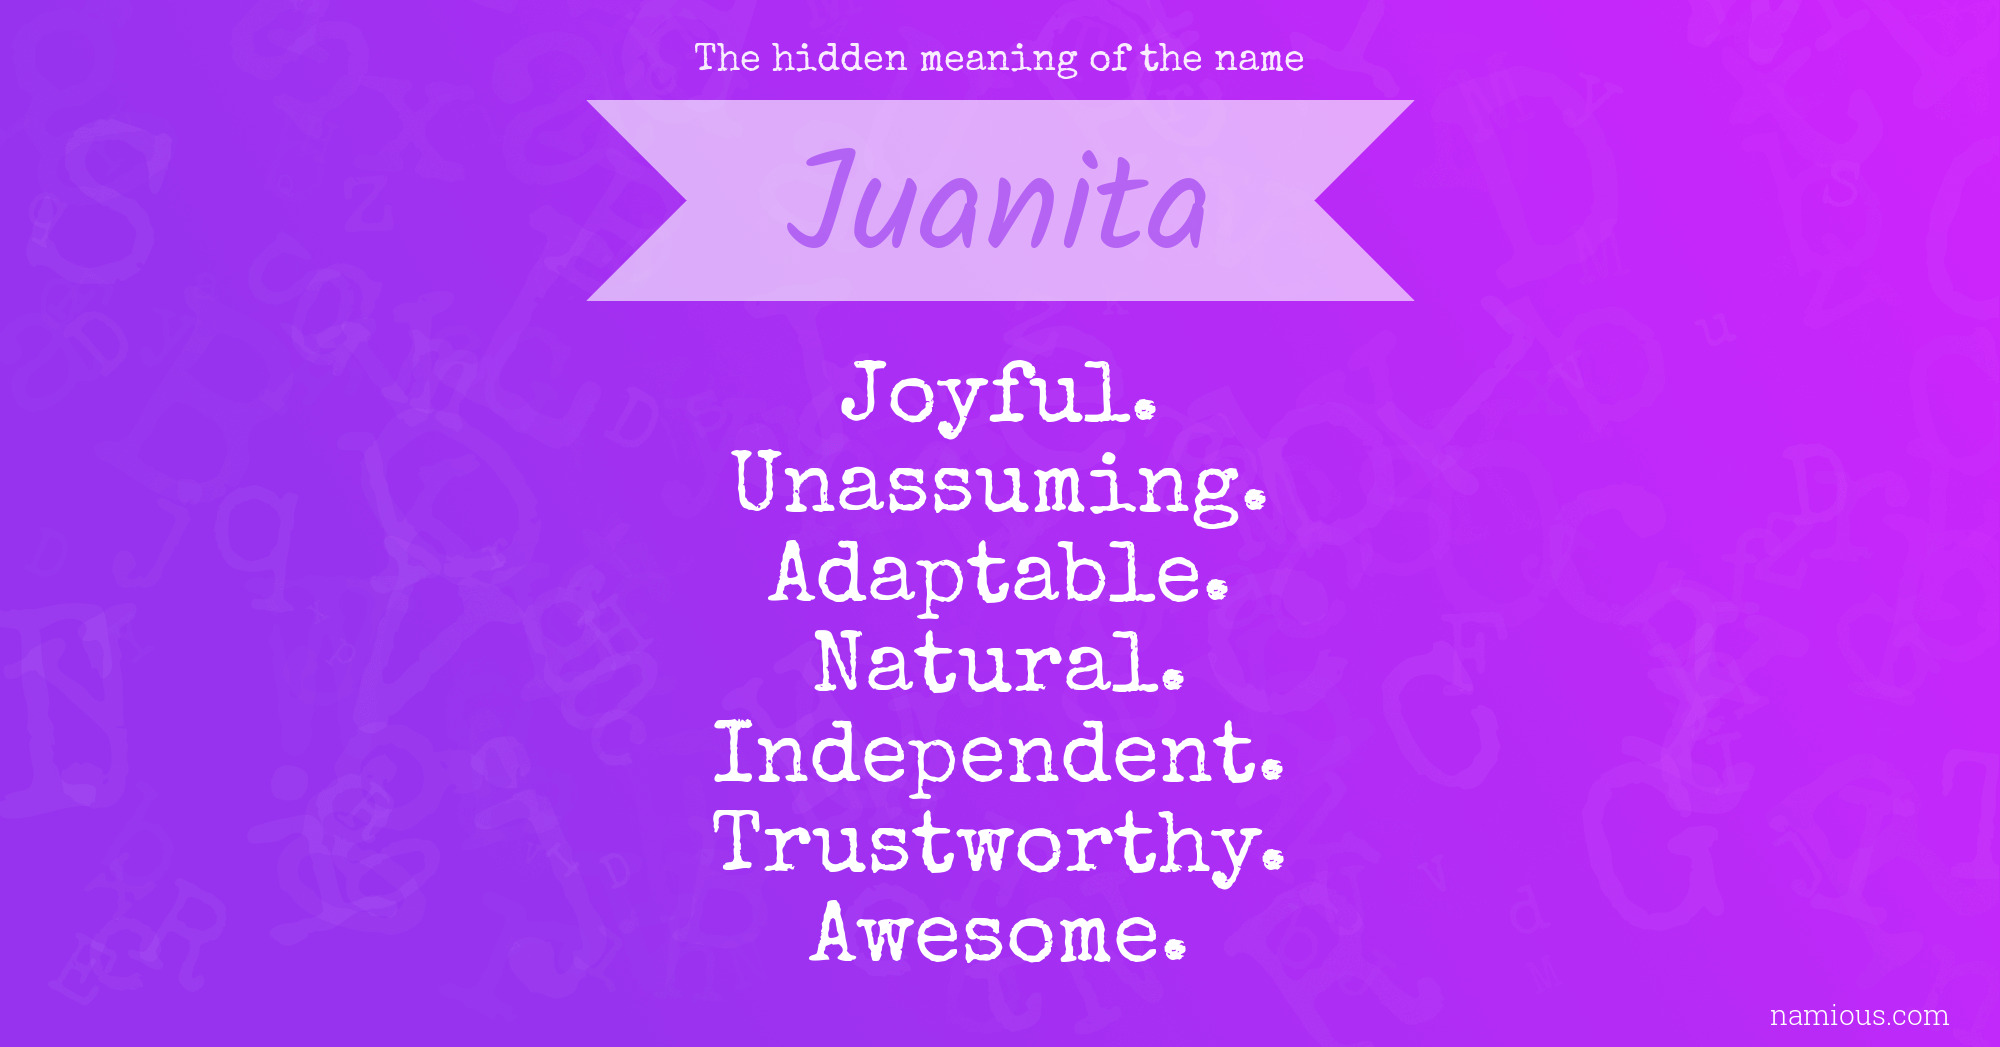 The hidden meaning of the name Juanita